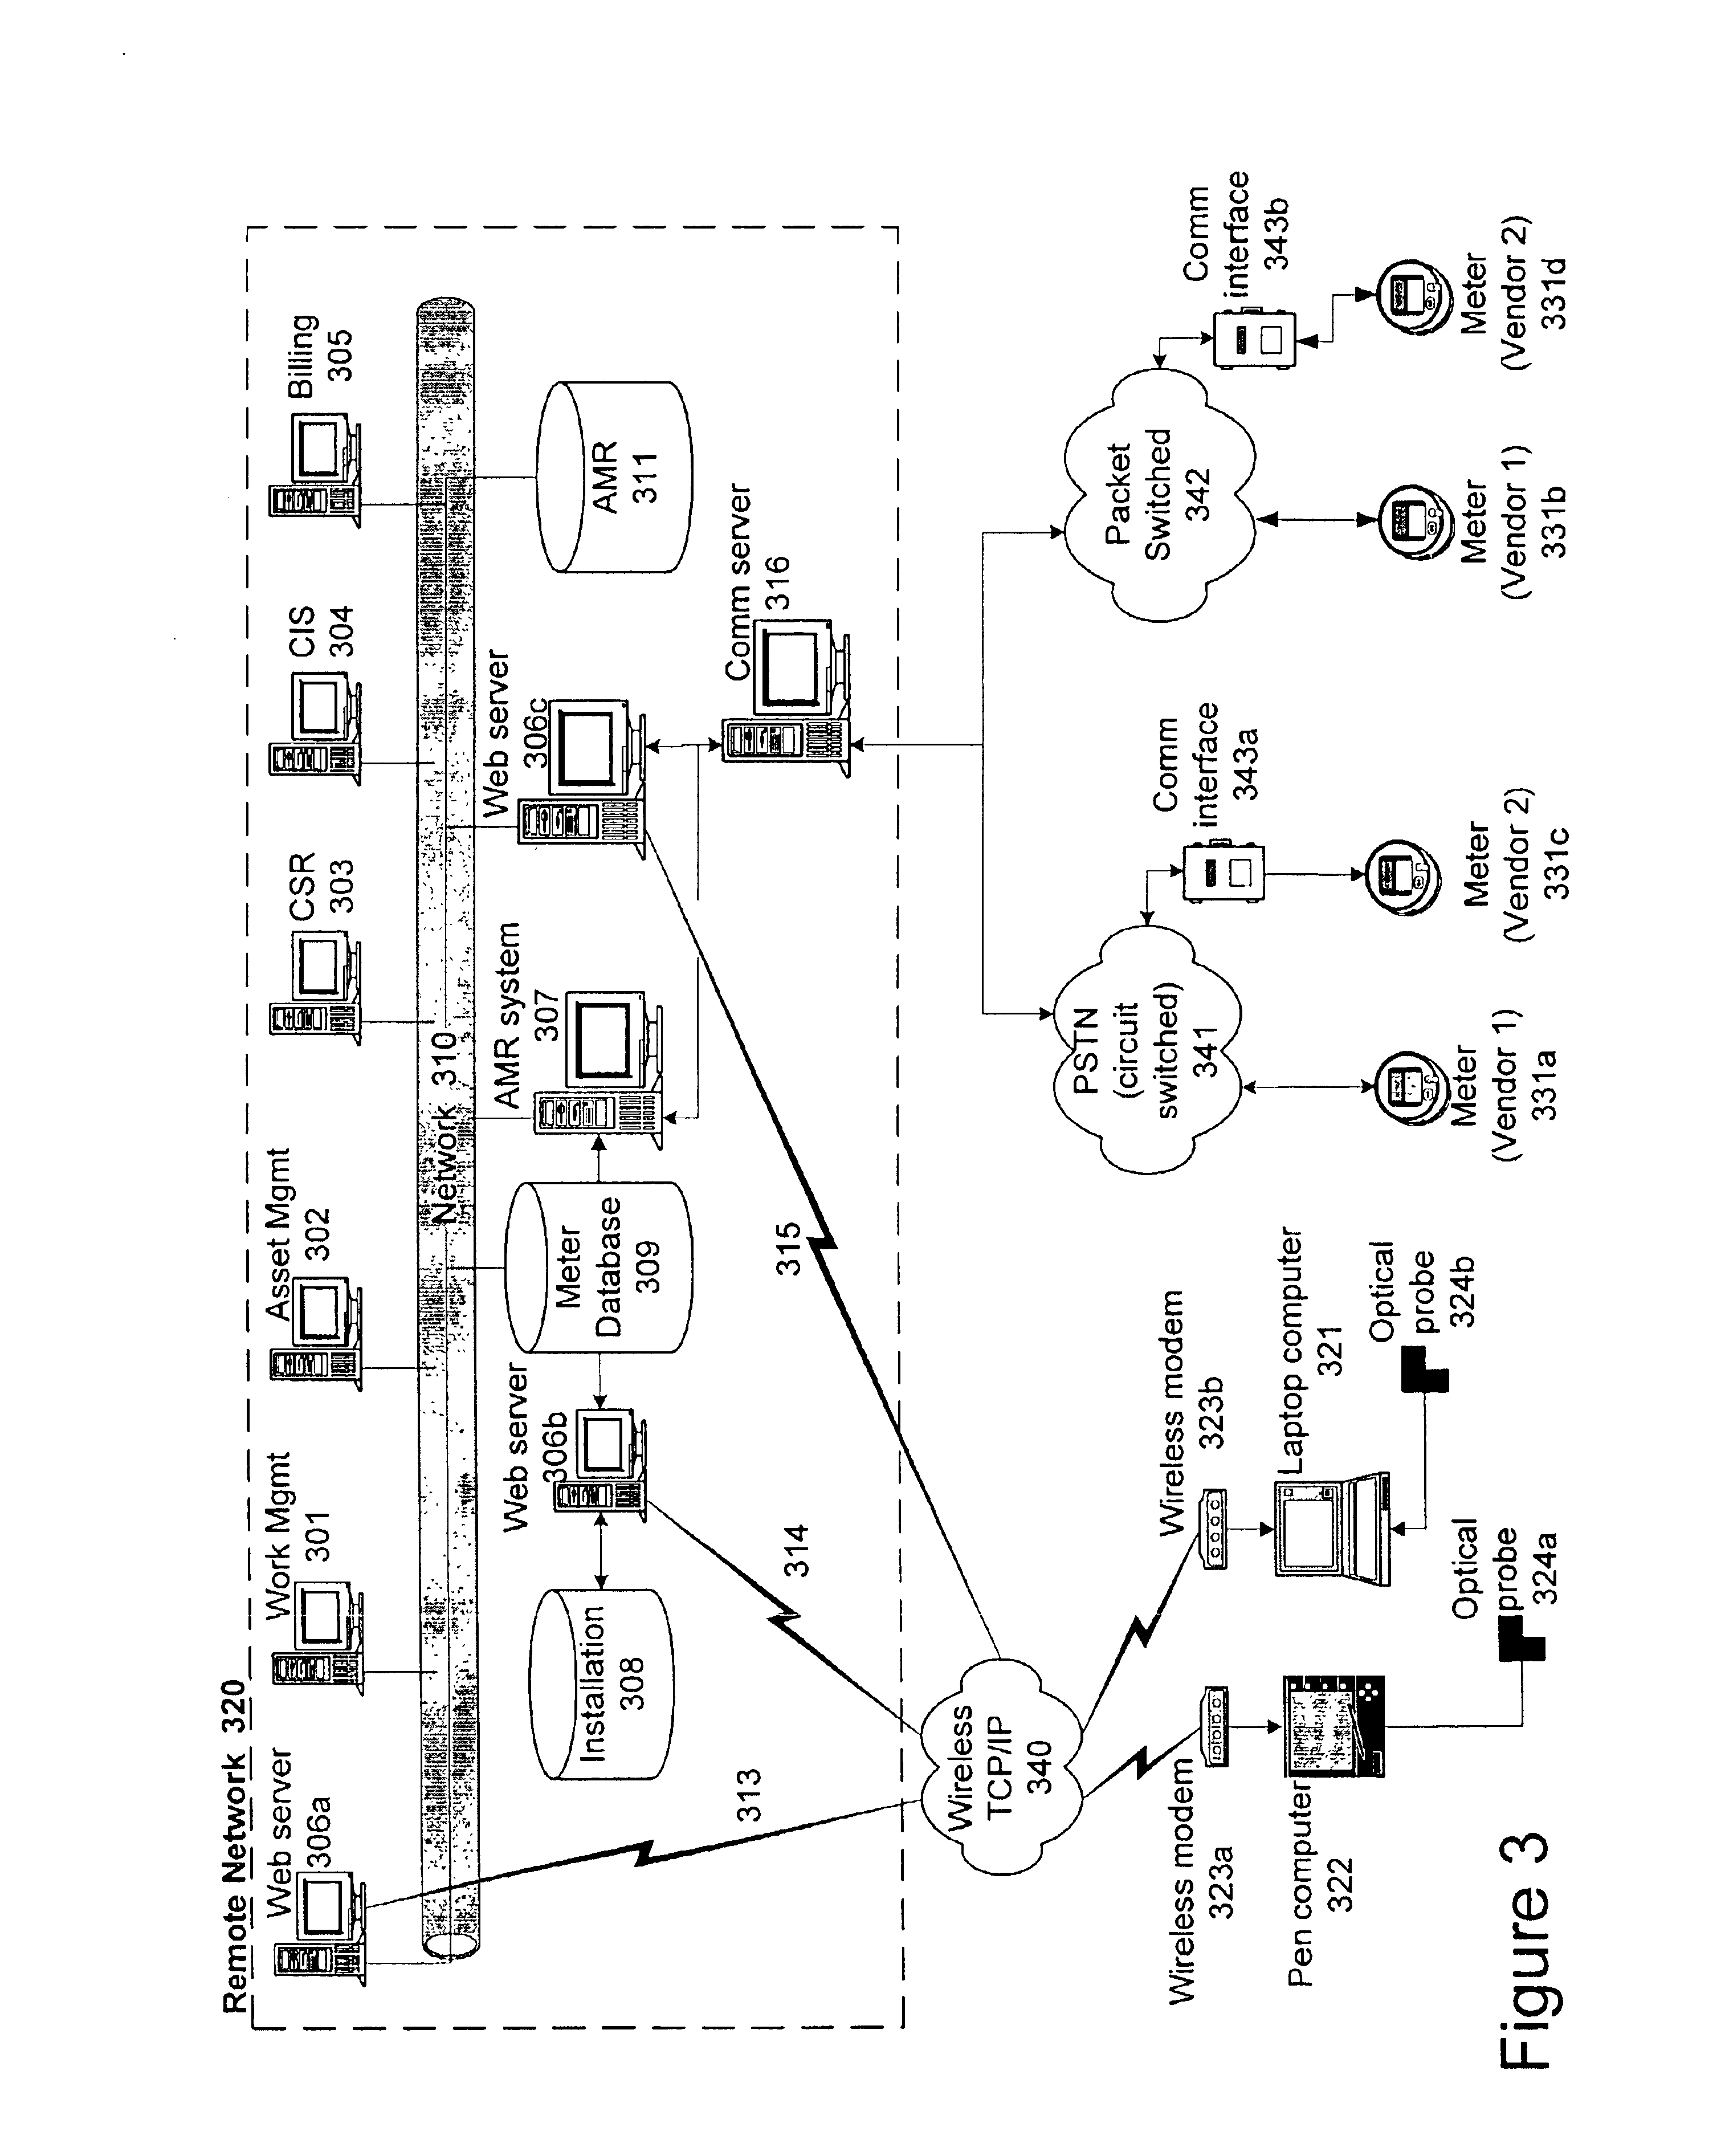 Automated on-site meter registration confirmation using a portable, wireless computing device